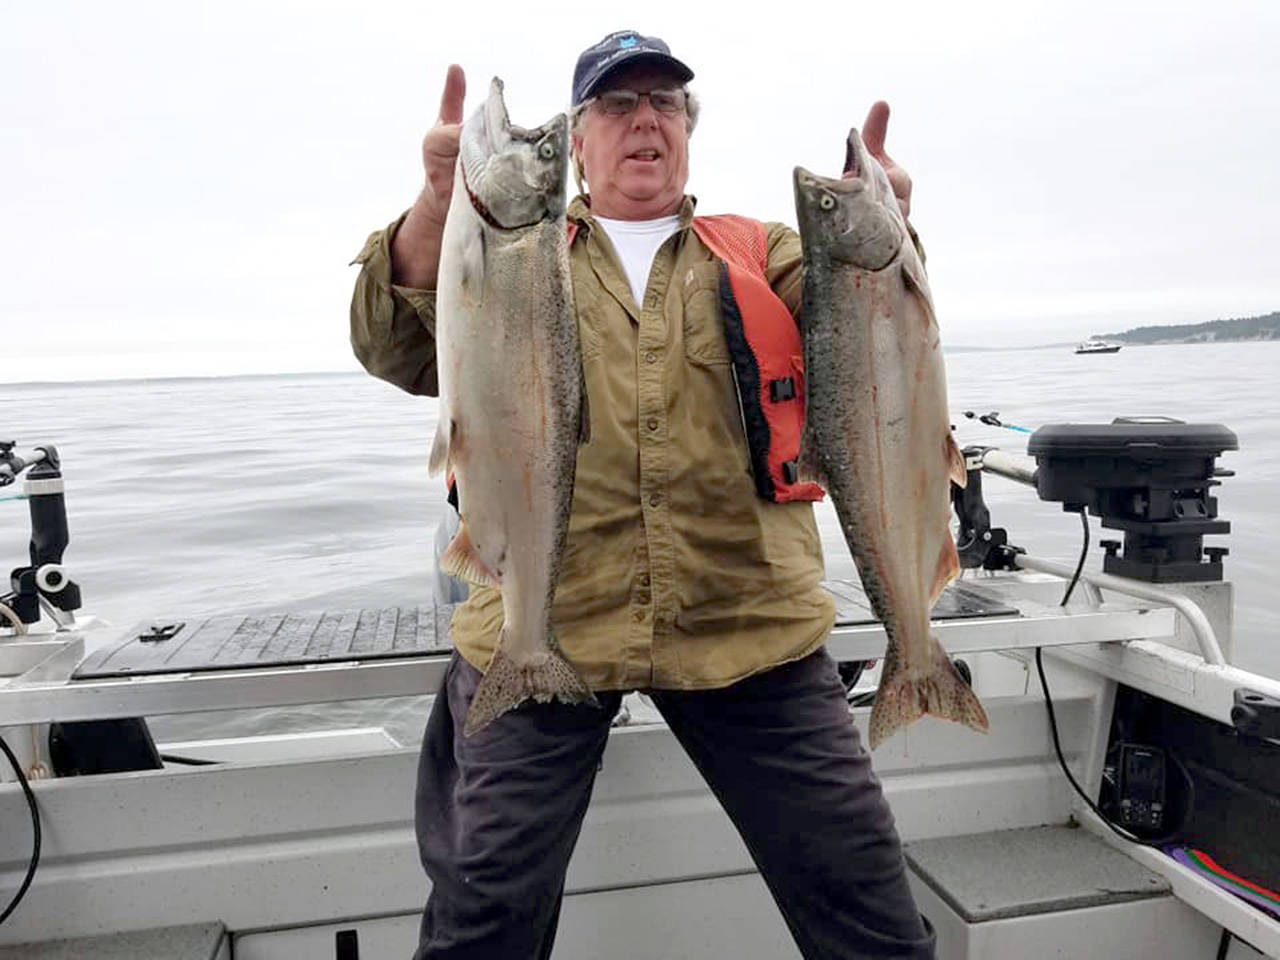 Port Townsend’s Don Arnett found success at Midchannel Bank on opening day of salmon season in Marine Area 9 (Admiralty Inlet). The chinook bite started hot and has cooled somewhat, but catches are still strong.